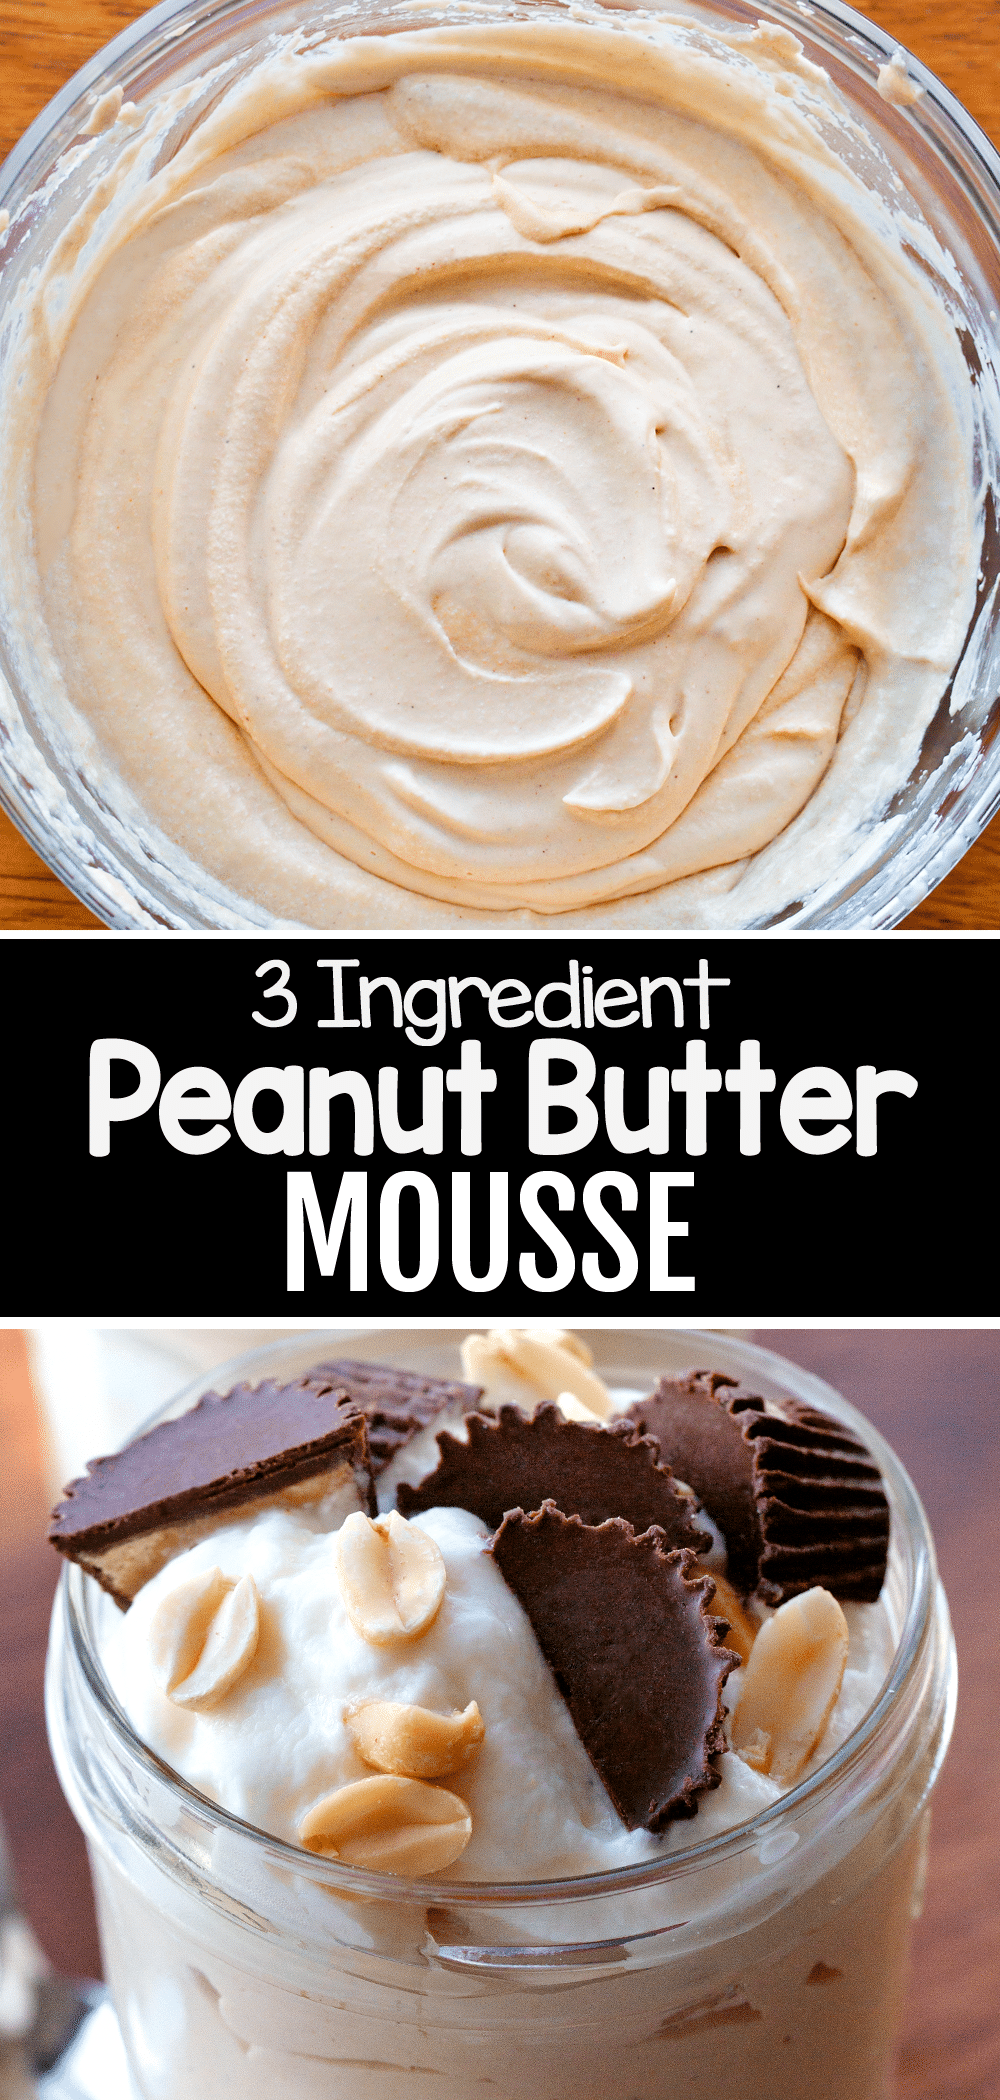 3 Ingredient Peanut Butter Mousse - Chocolate Covered Katie